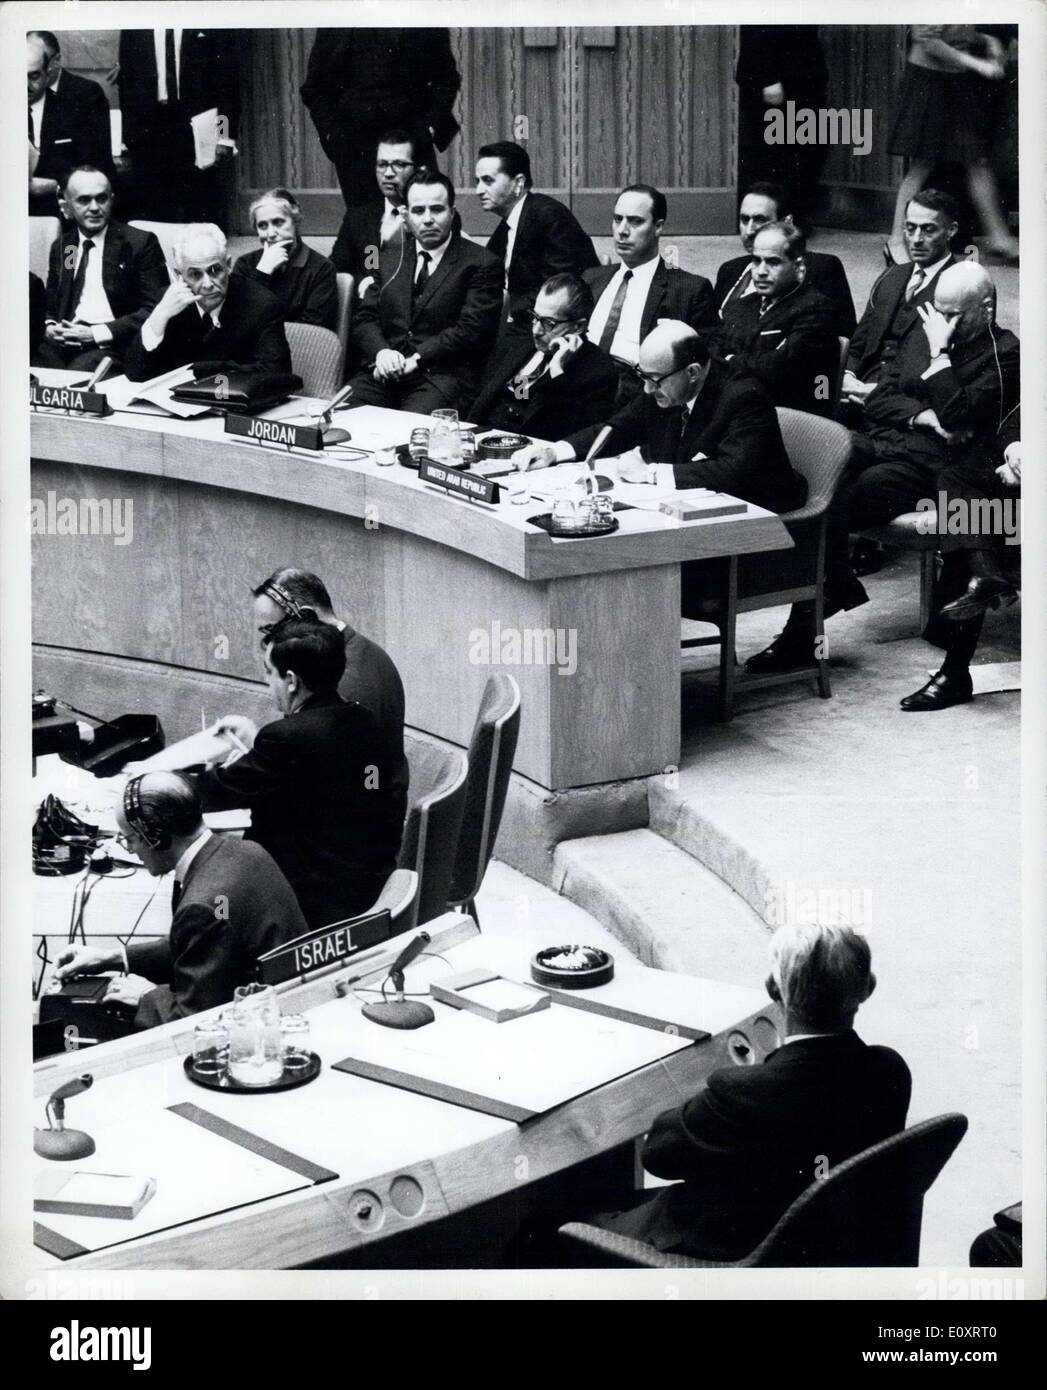 Nov. 09, 1967 - Security Council Hears 12 Statements on Middle East Receives Two Draft Resolution - The Security Council, in a Meeting Beginning in the Afternoon of Thursday, 9 November, and Ending Early Friday, 10 November, discussed the Situation in the Middle East at the Request of the united Arab Republic, and heard statements by the United Arab Republic, Inida, Nigeria, Sovit Union, United Kington, United States, Ehiopia, Canada, Denmark, France, Japan and Argentina. Two draft resolutions were introduced. One was submitted by India, Mali and Nigeria, the other by the United States. Stock Photo